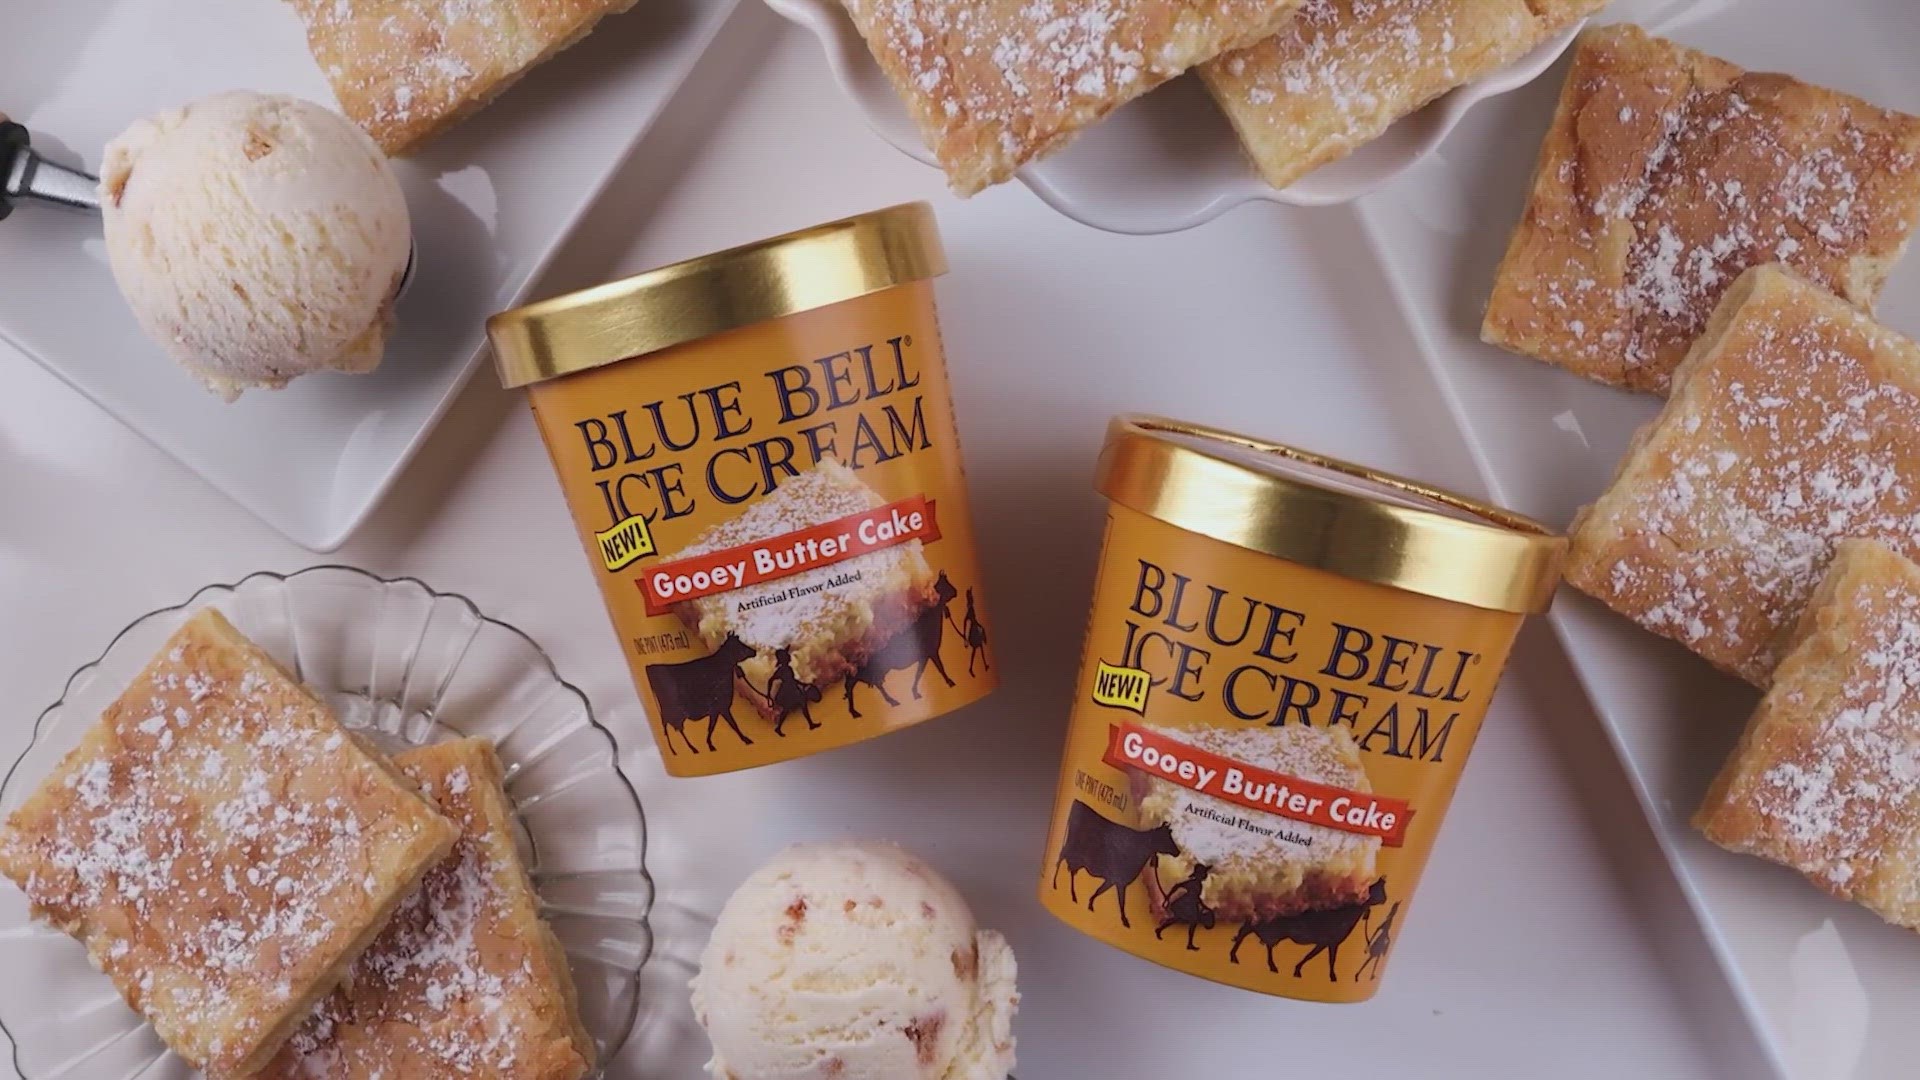 Blue Bell just released a new ice cream flavor.